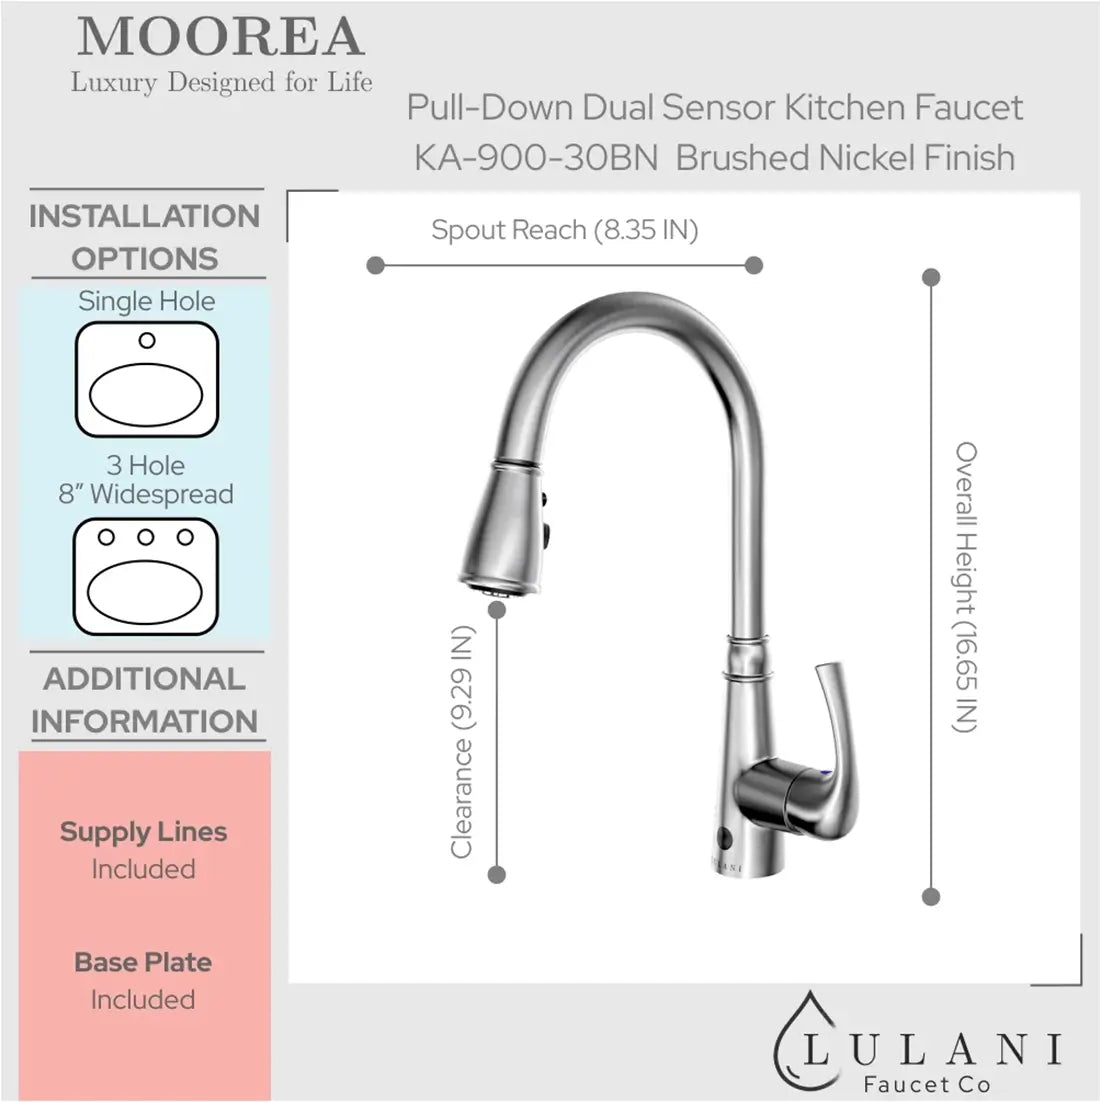 Lulani Moorea Brushed Nickel 1.8 GPM Dual Sensor Single Handle Pull-Down Faucet With Baseplate